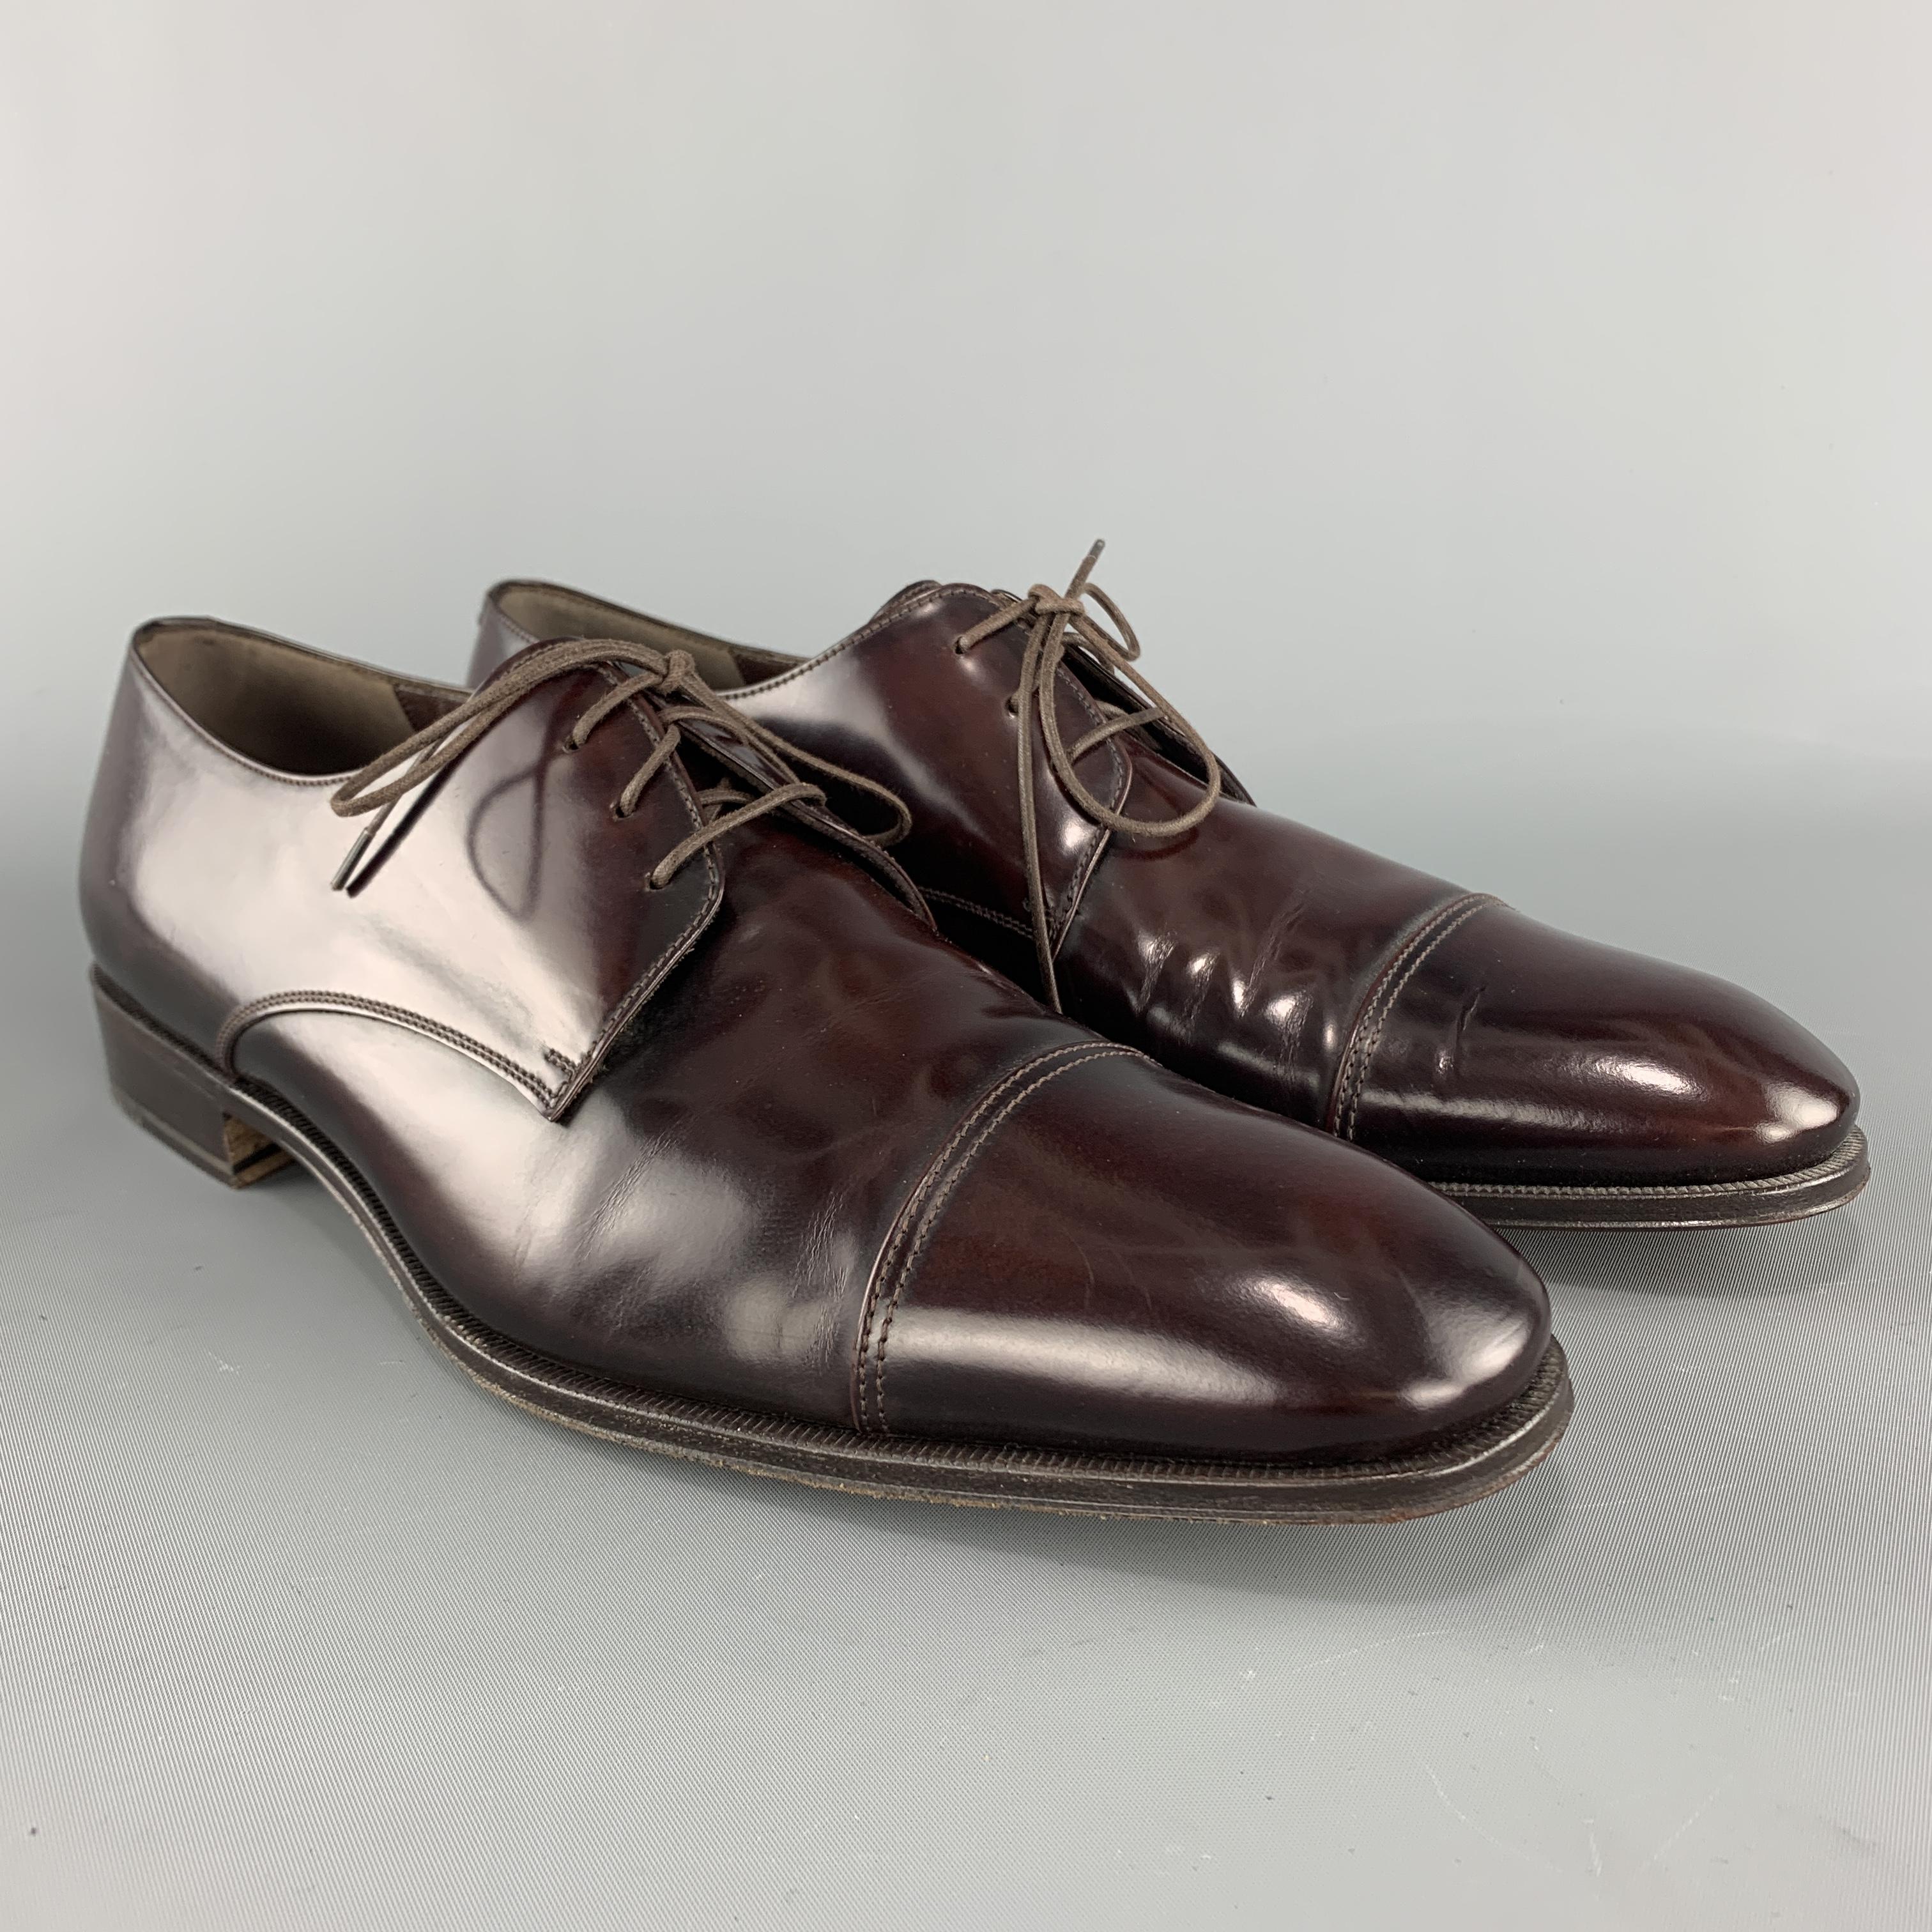 SALVATORE FERRAGAMO dress shoes come in burgundy polished leather with a cap toe. Made in Italy.

Excellent Pre-Owned Condition.
Marked: US 10.5

Outsole: 12.25 x 4 in.